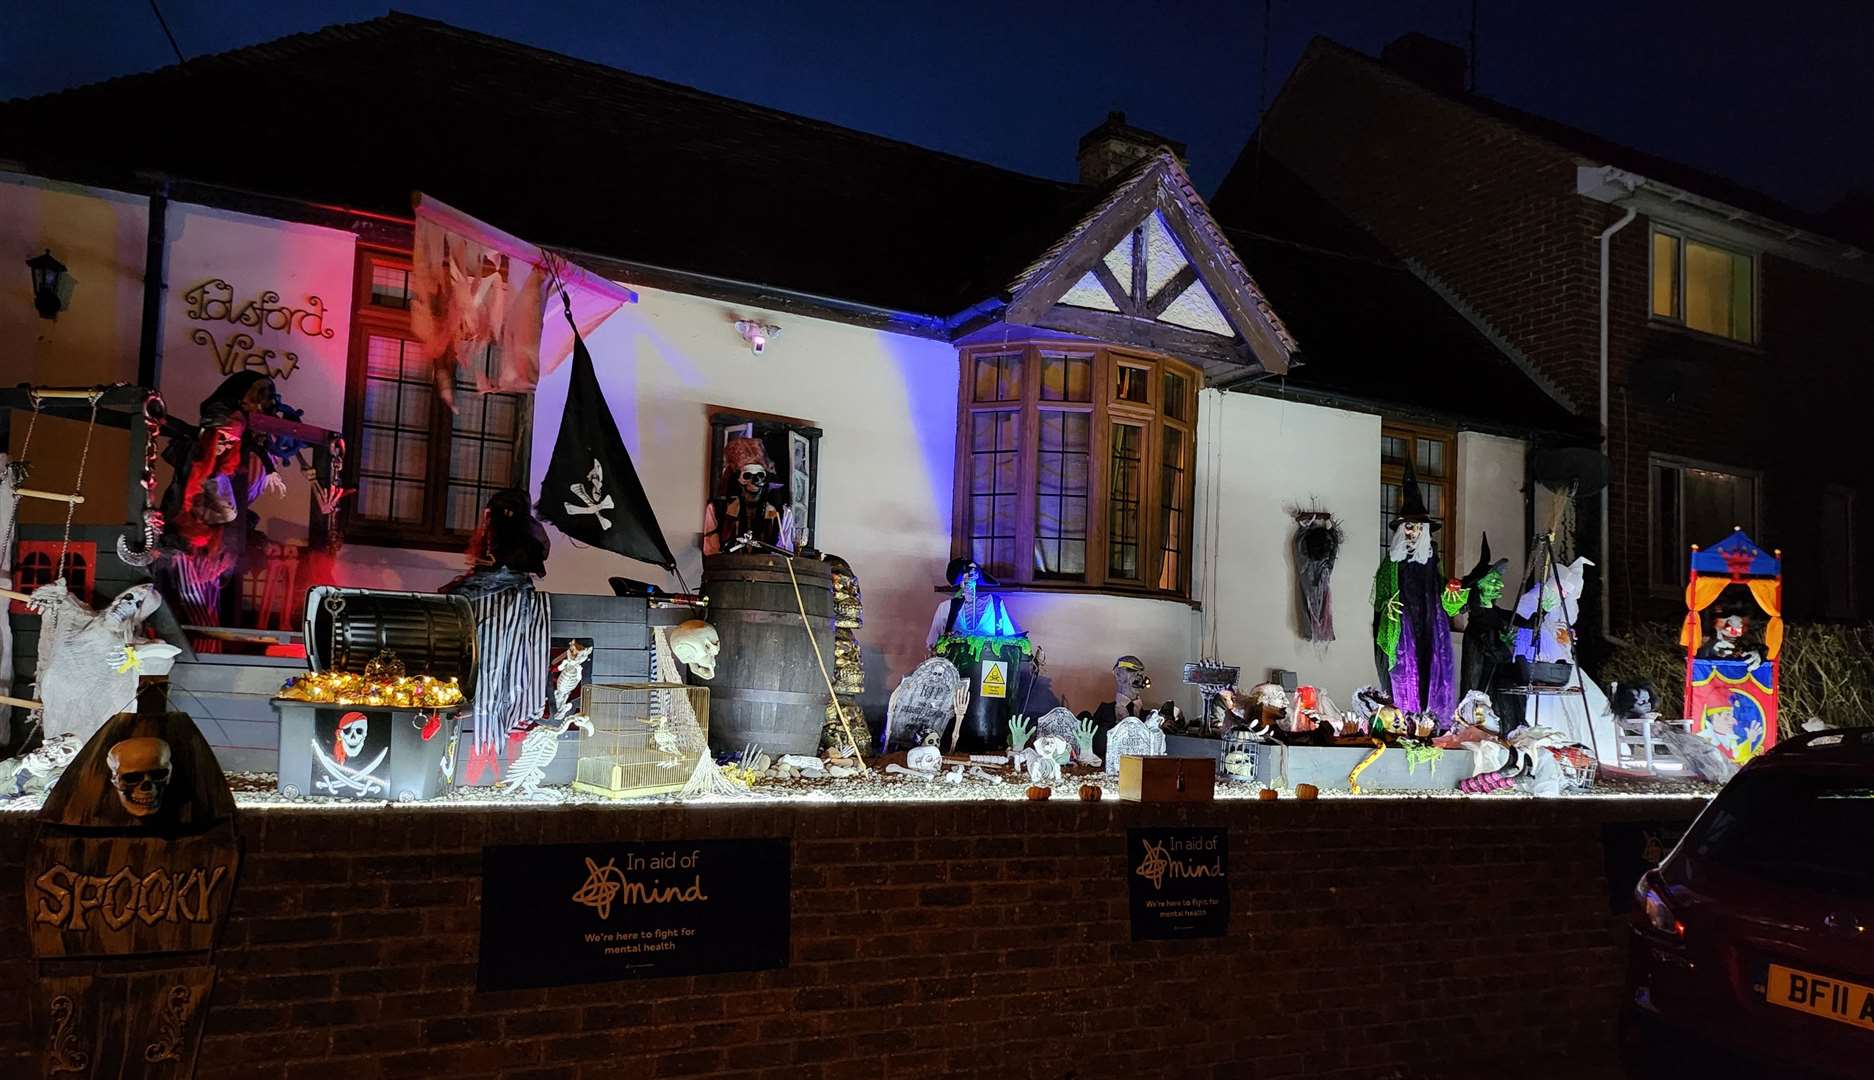 The pirate themed display is raising money for Mind